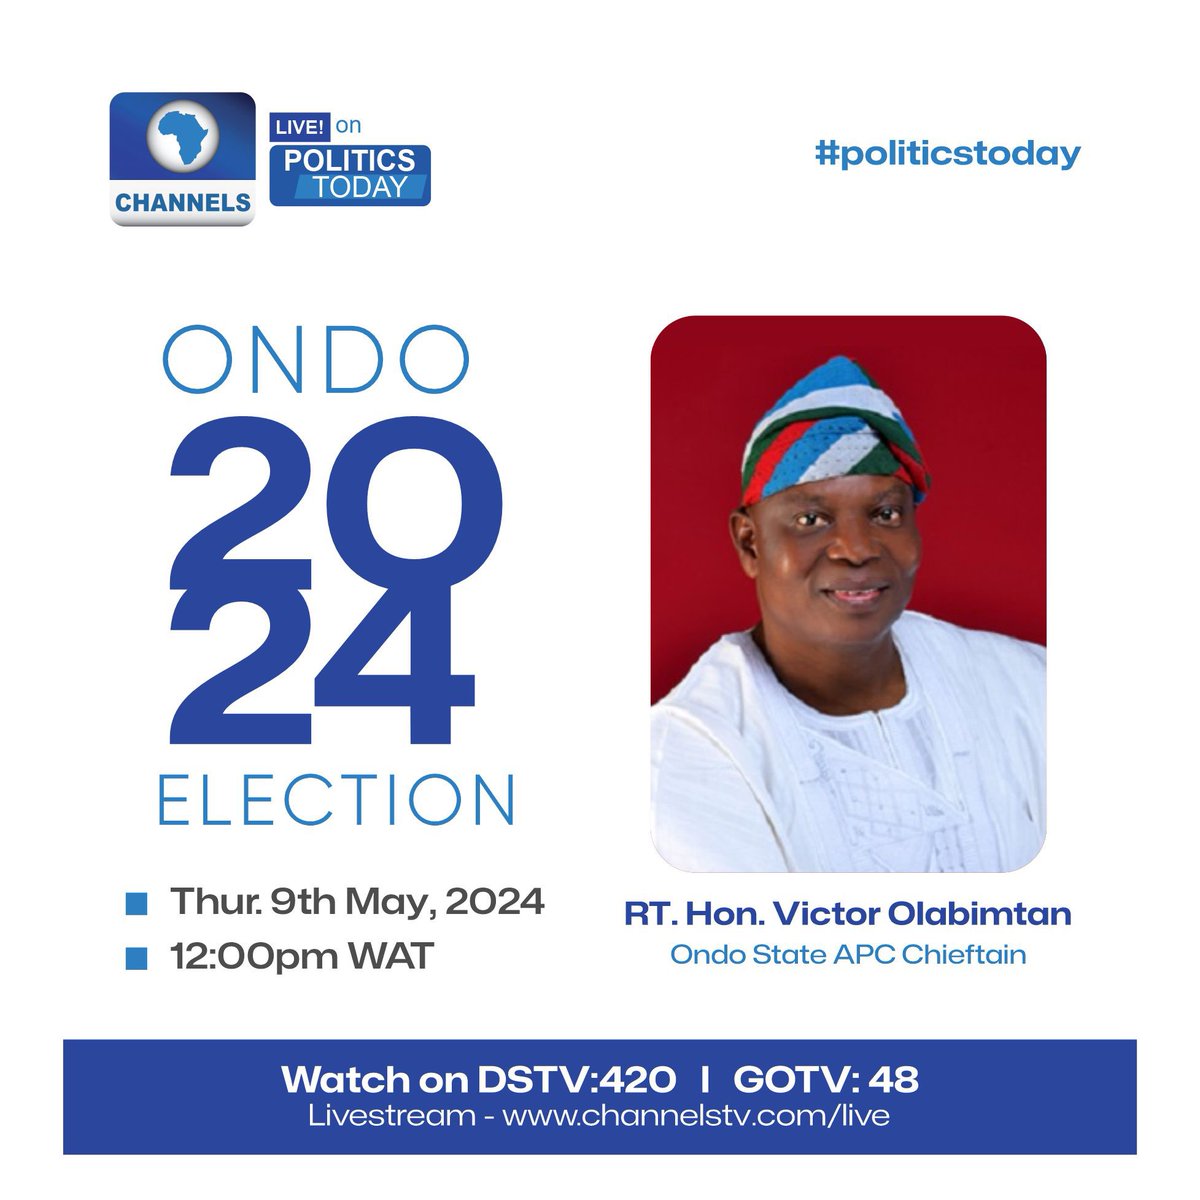 RT. Hon. Victor Olabimtan (Ondo State APC Chieftain) Live interview by 12pm on channel Tv.